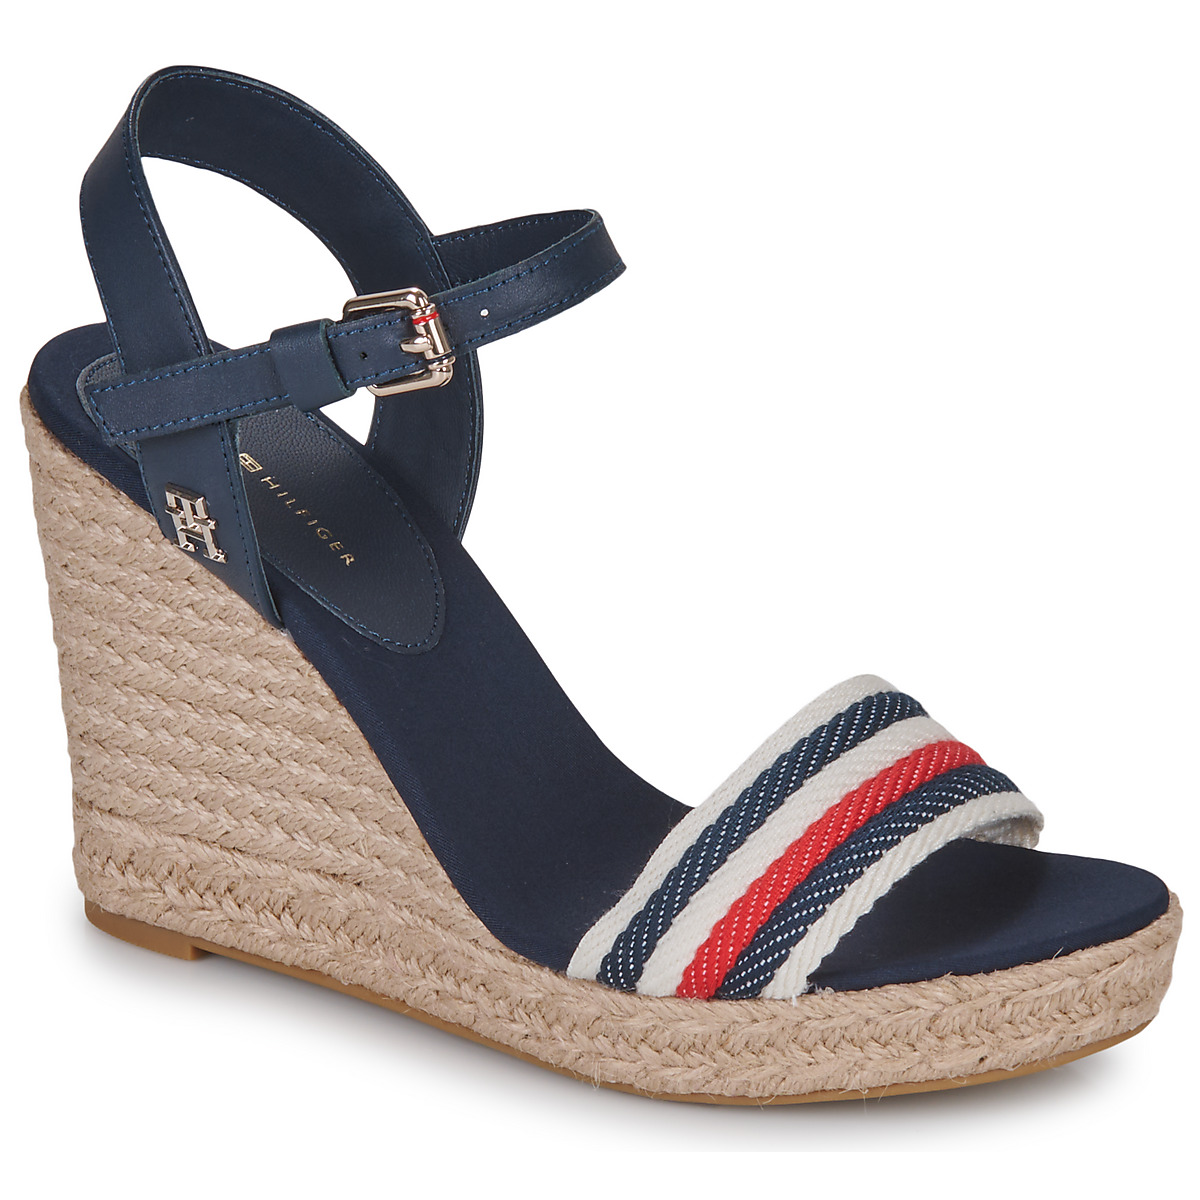 Chaussures Femme Толстовка кофта T3B9-32481-1355 tommy hilfiger CORPORATE WEDGE Marine